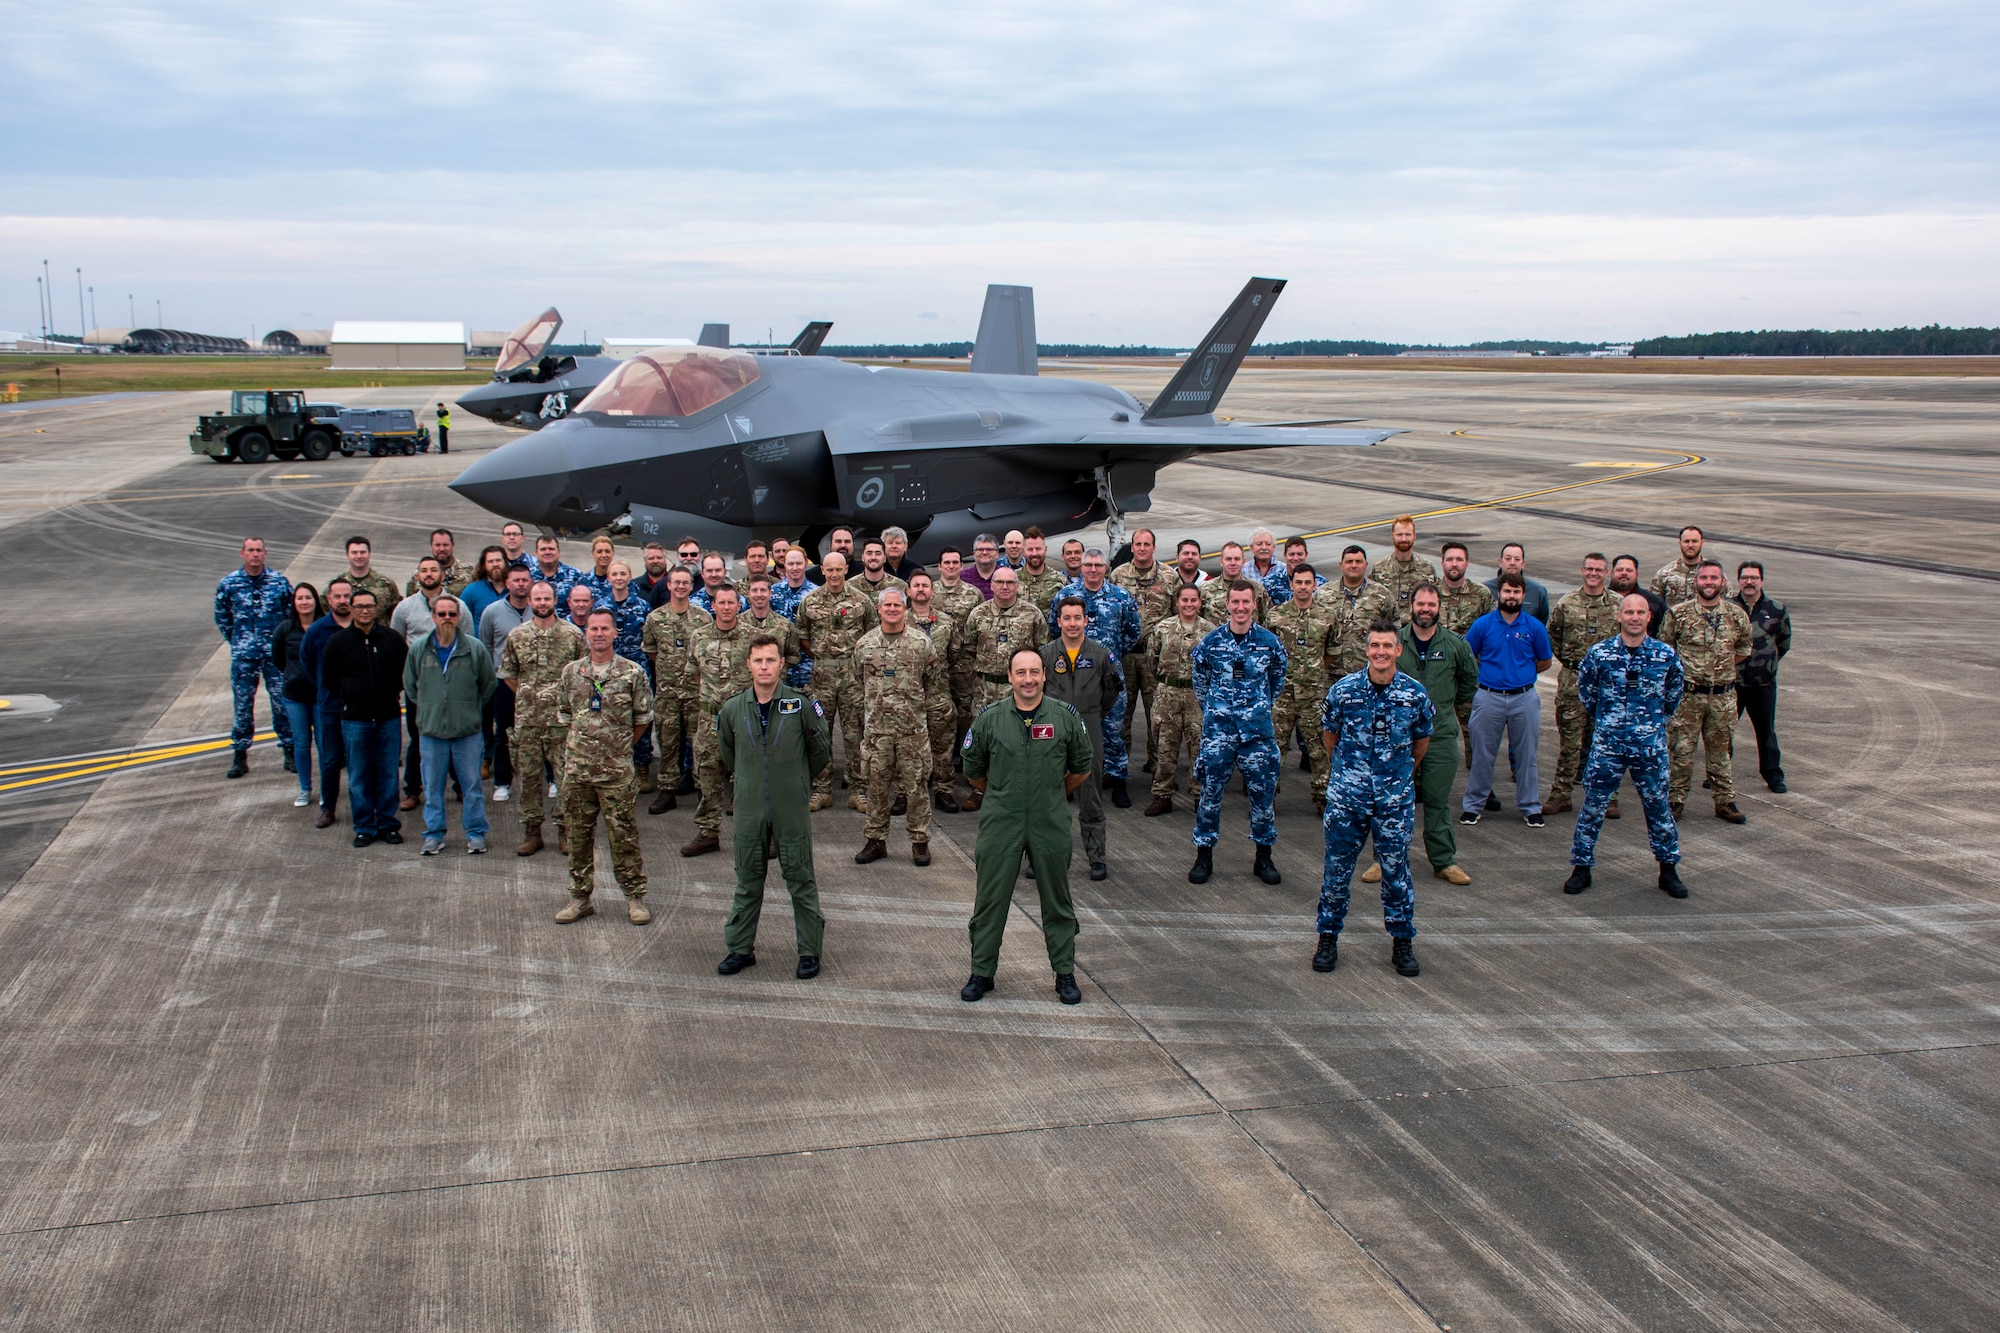 Members of the Royal Australian Air Force and Australia-Canada-United Kingdom Reprogramming Laboratory stand in front of an F-35A Lightning II on Nov. 23, 2021, at Eglin Air Force Base, Fla. This is the second year No 77 Squadron has participated in Exercise Lightning Spear, a live-fire missile event supported by the 53rd Wing that evaluates the entire unit on their ability to support the AIM-120D Advanced Medium Range Air-to-Air Missile combat capability of their F-35s. The RAAF works alongside ACURL to reprogram the mission data collected during ELS. (U.S. Air Force photo by 1st Lt. Lindsey Heflin)